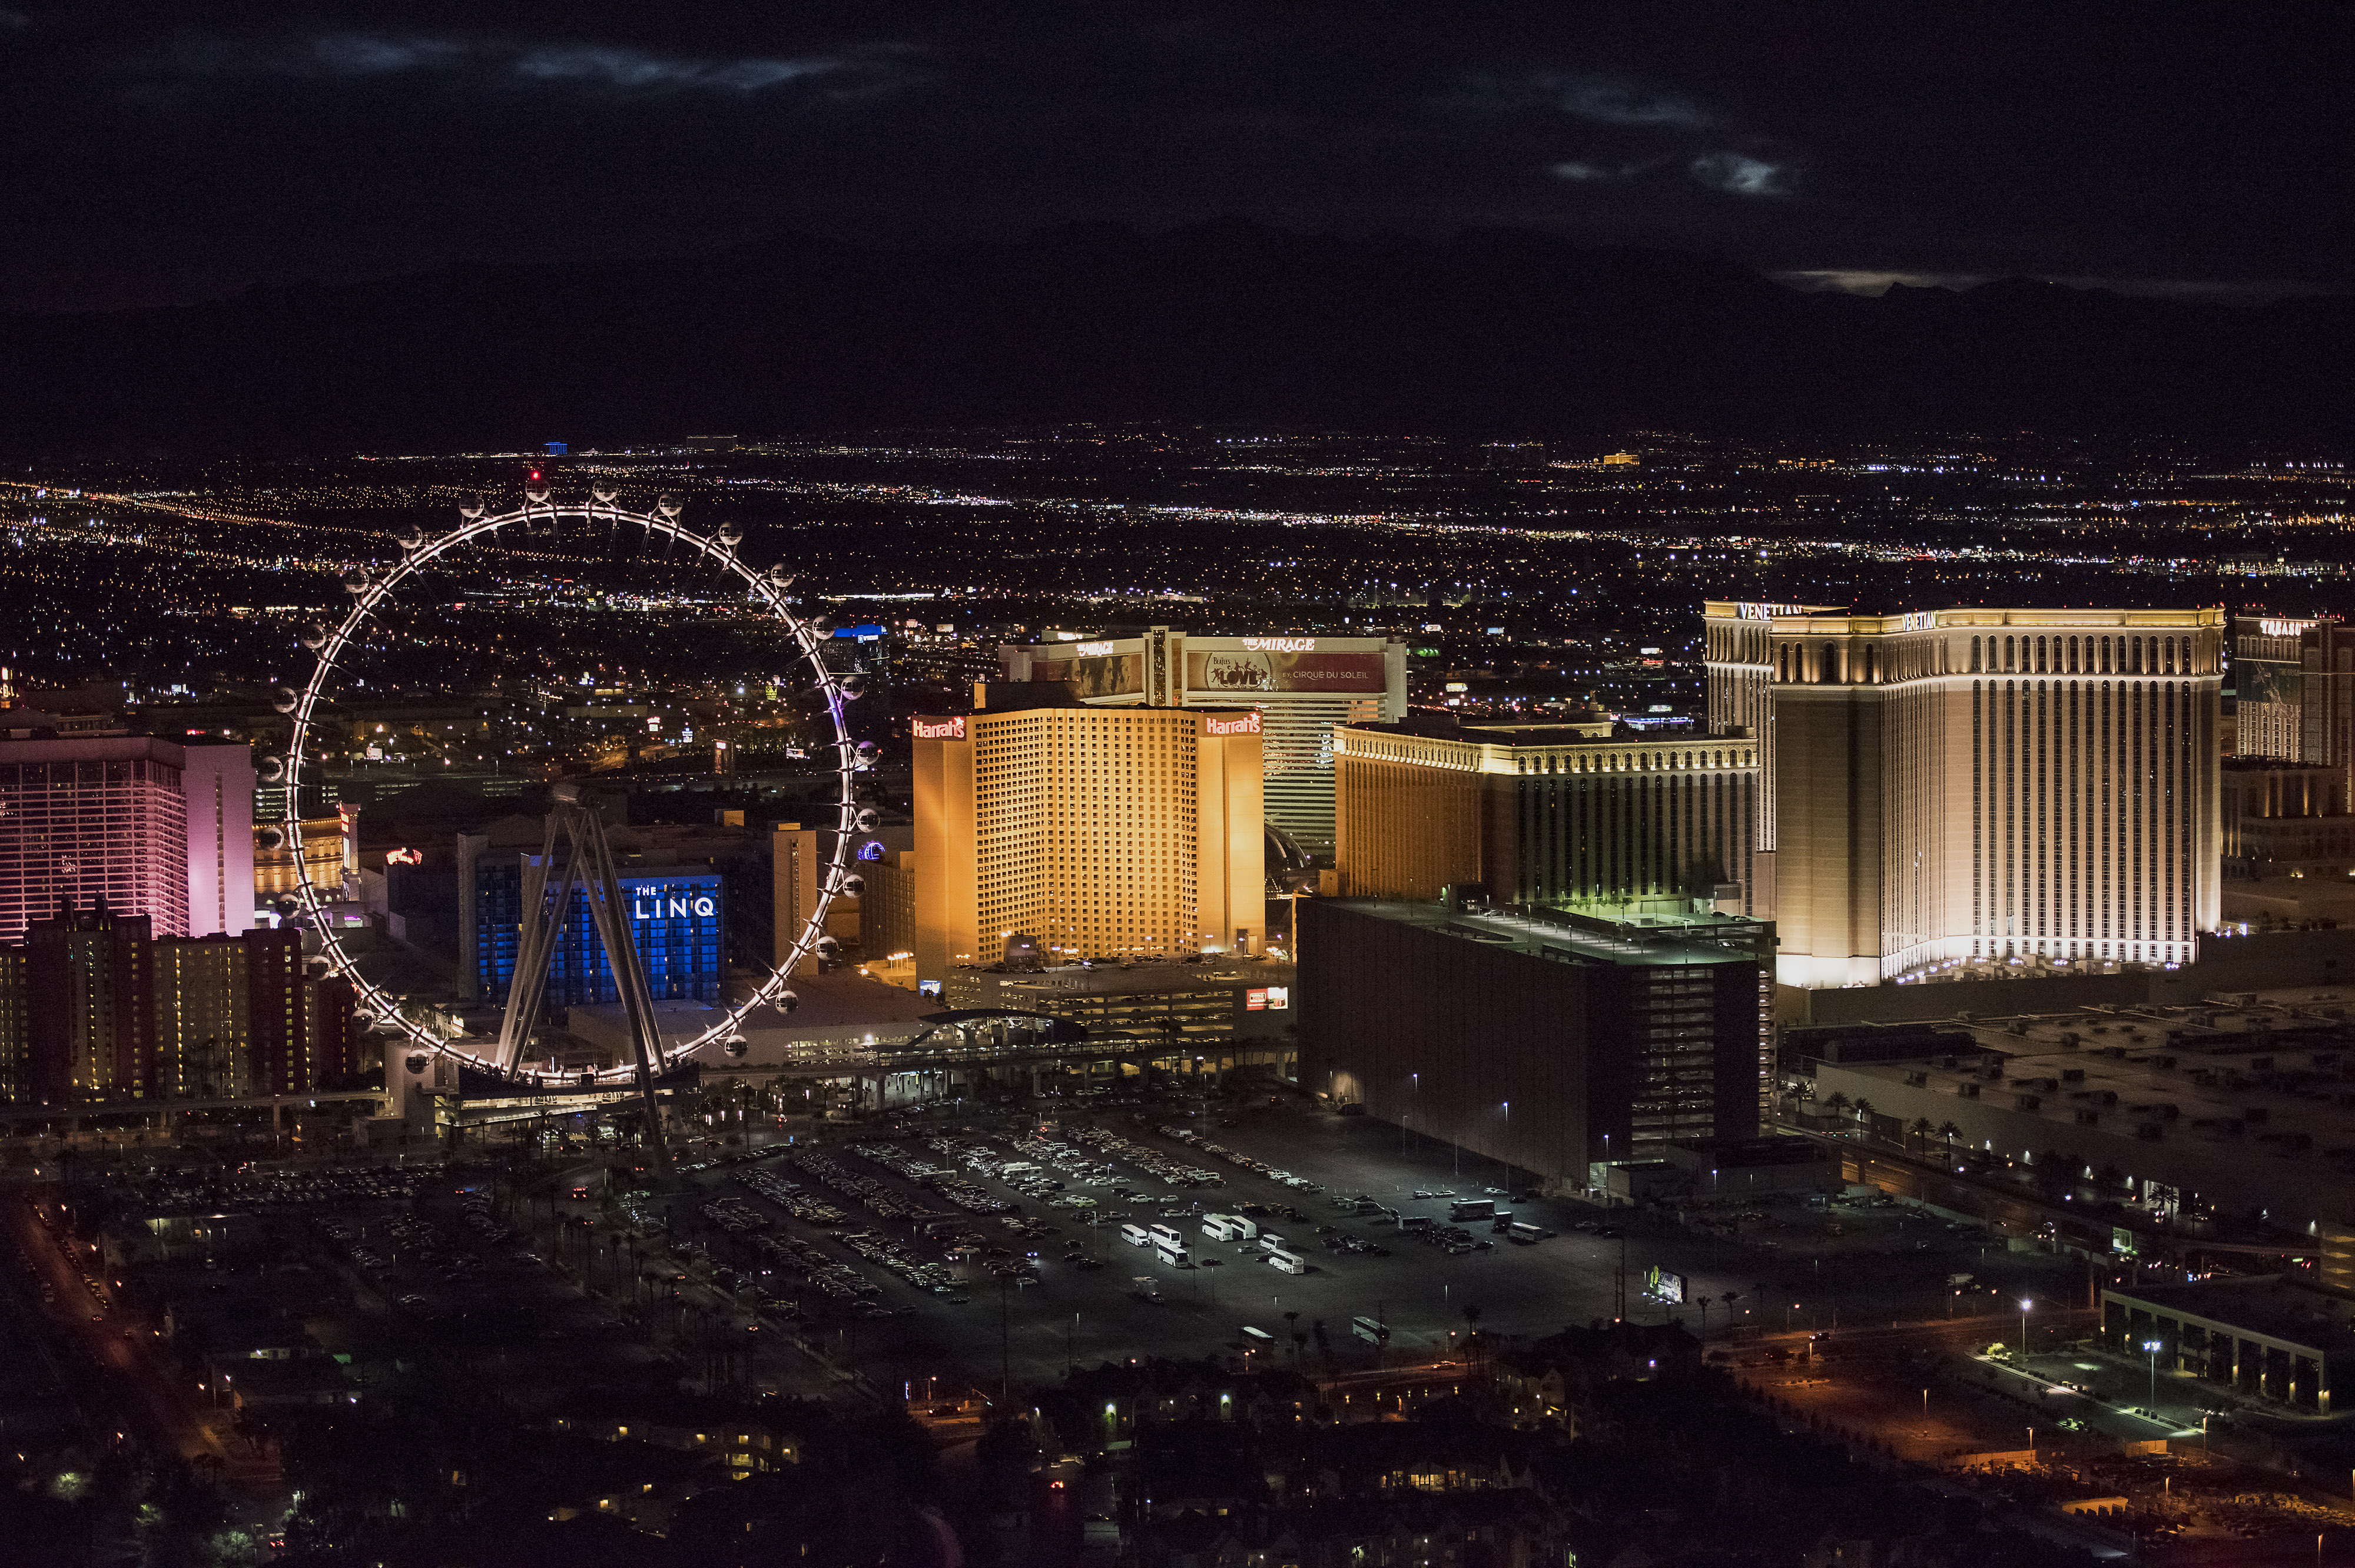 Aerials Views And Major Hotels On The Strip As Las Vegas Set To Top Last Year’s Tourism Record